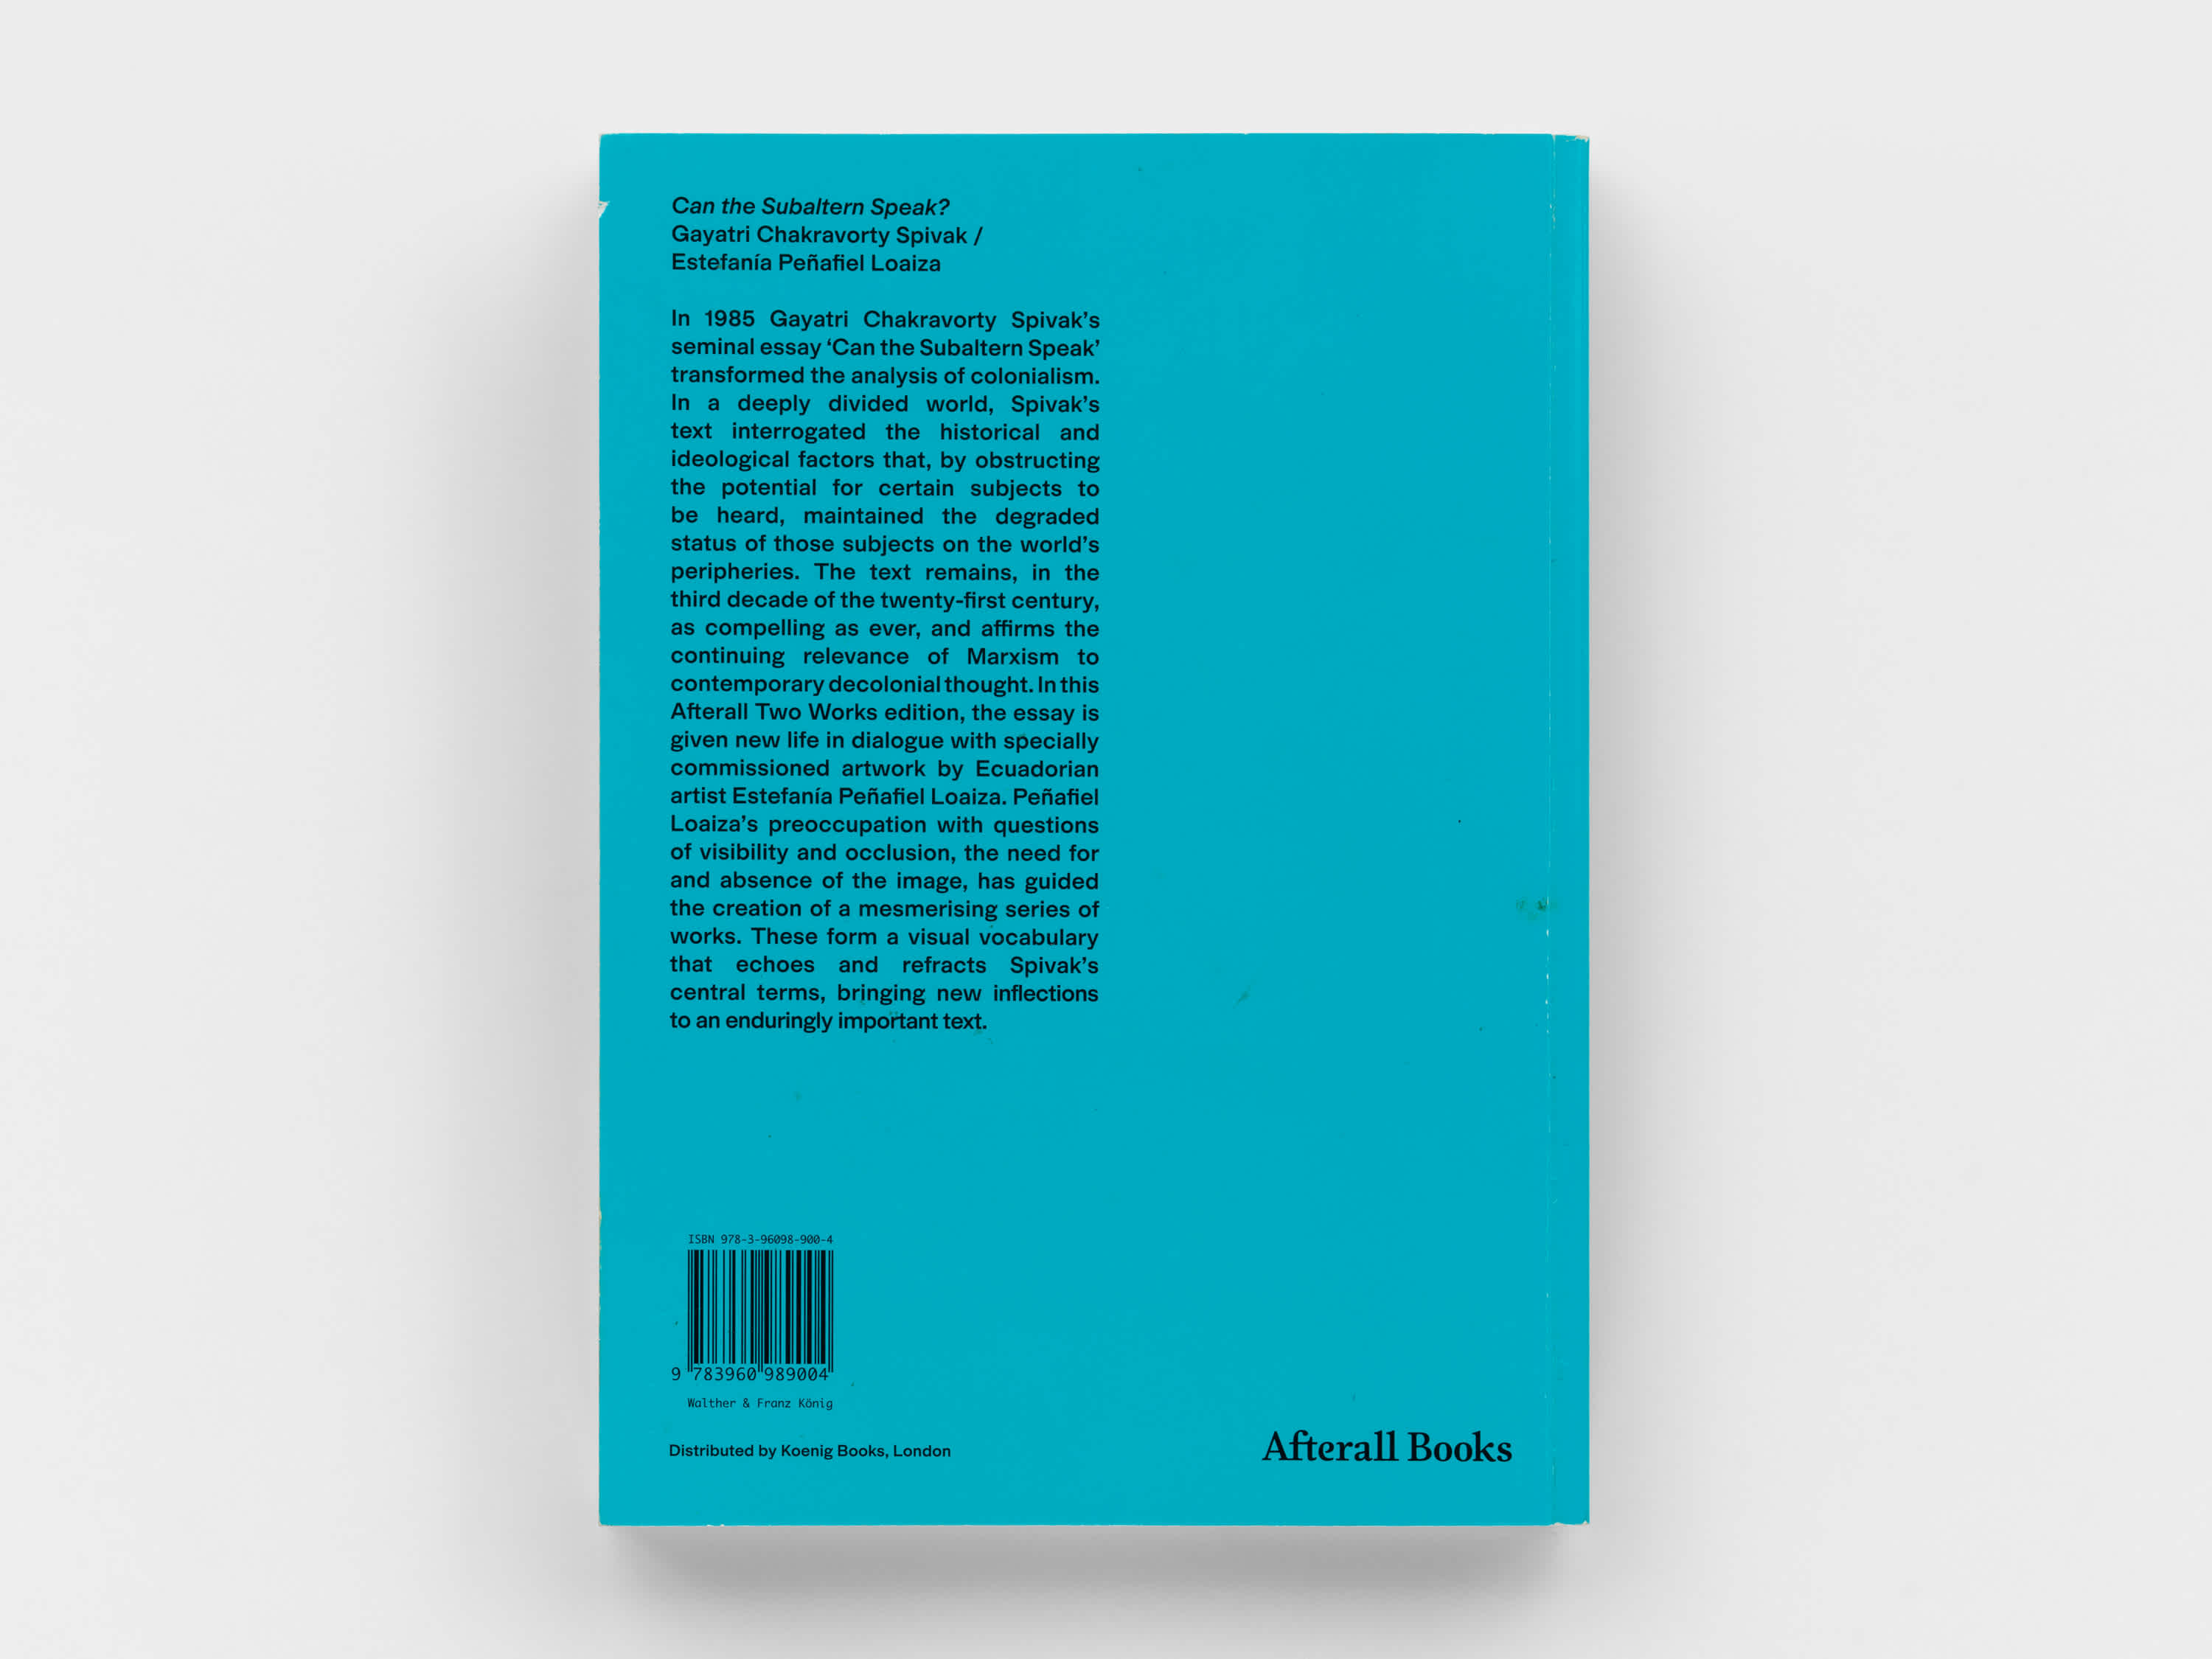 Bright blue back book cover with black text.